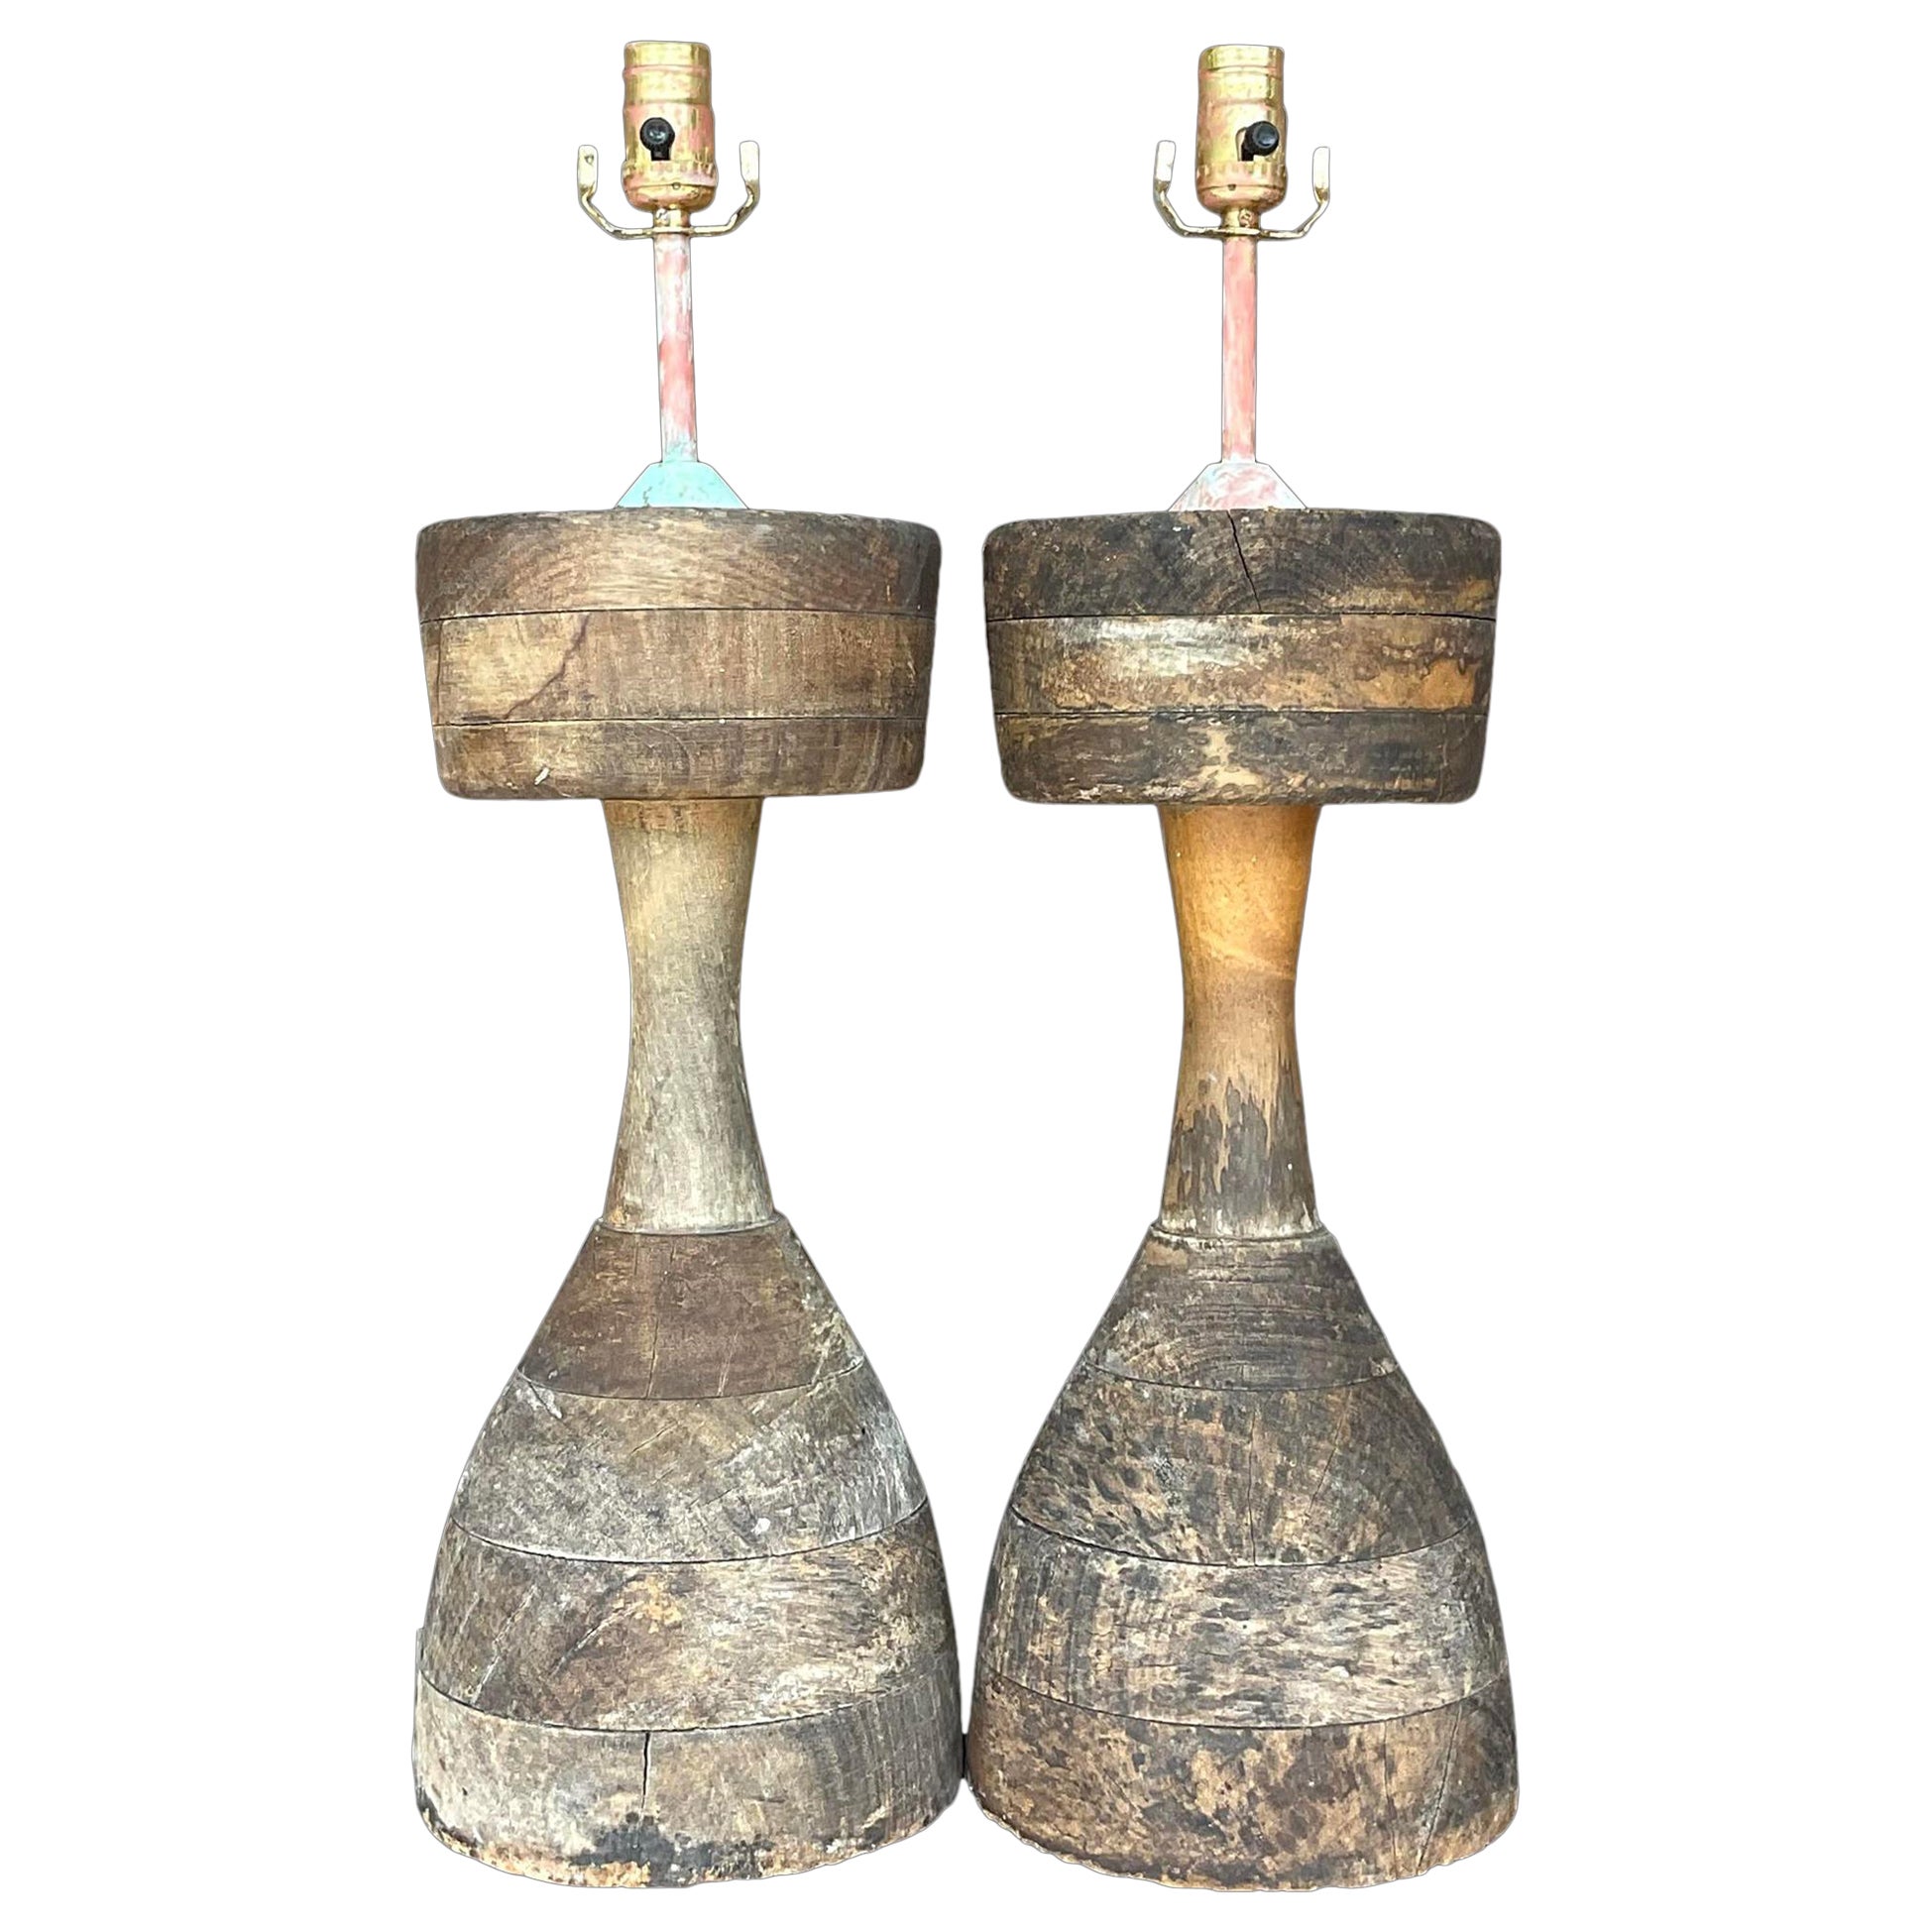 Vintage Boho Stacked Distressed Wood Lamps - a Pair For Sale